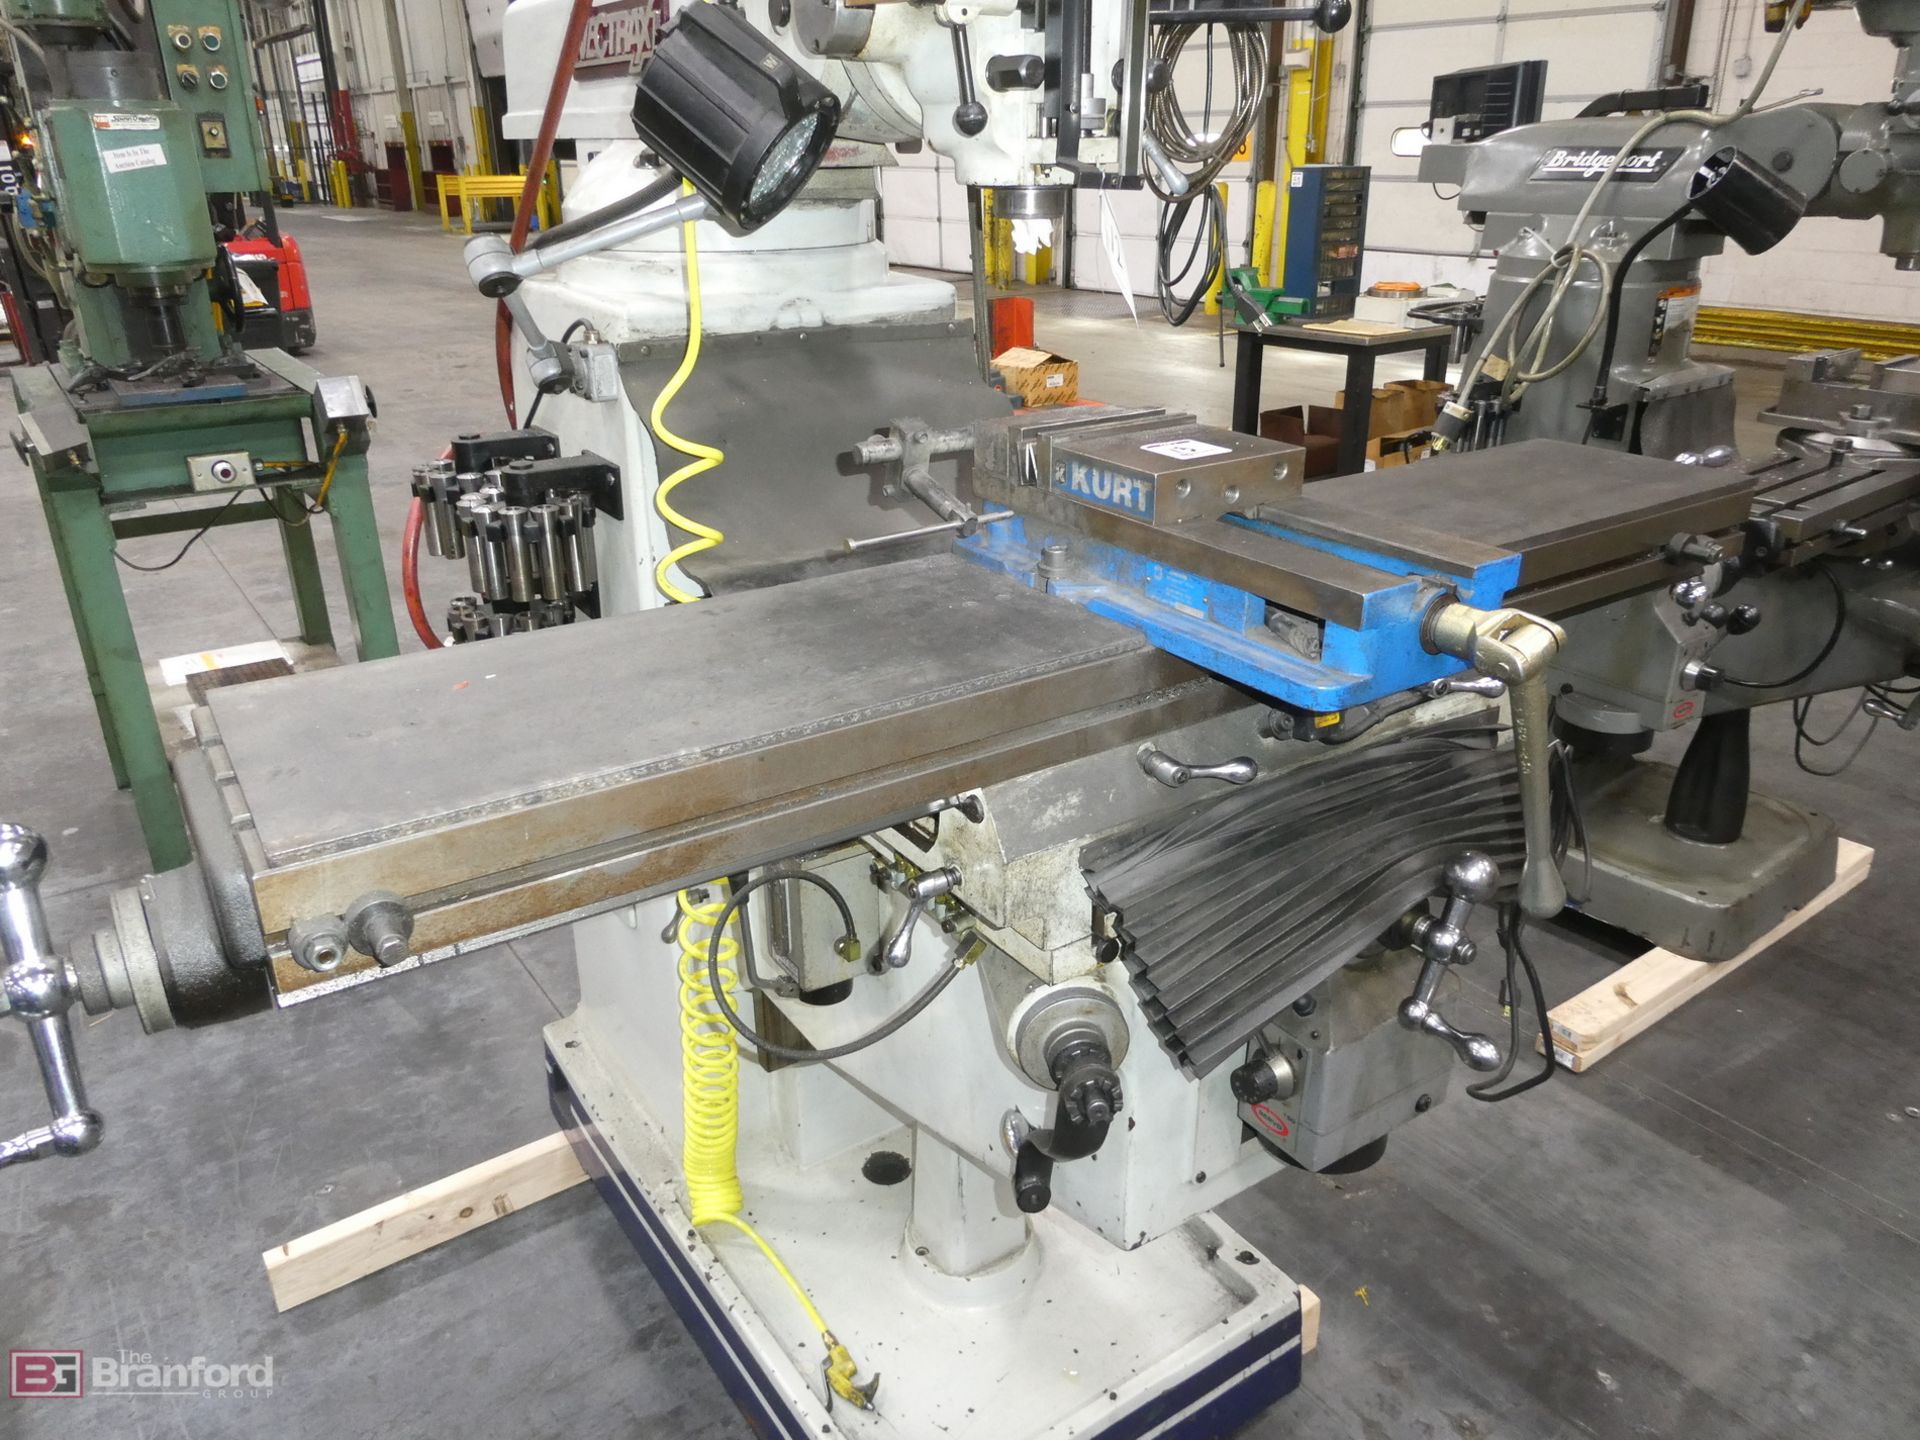 Vectrax Model GS-20V, Vertical Milling Machine - Image 8 of 14